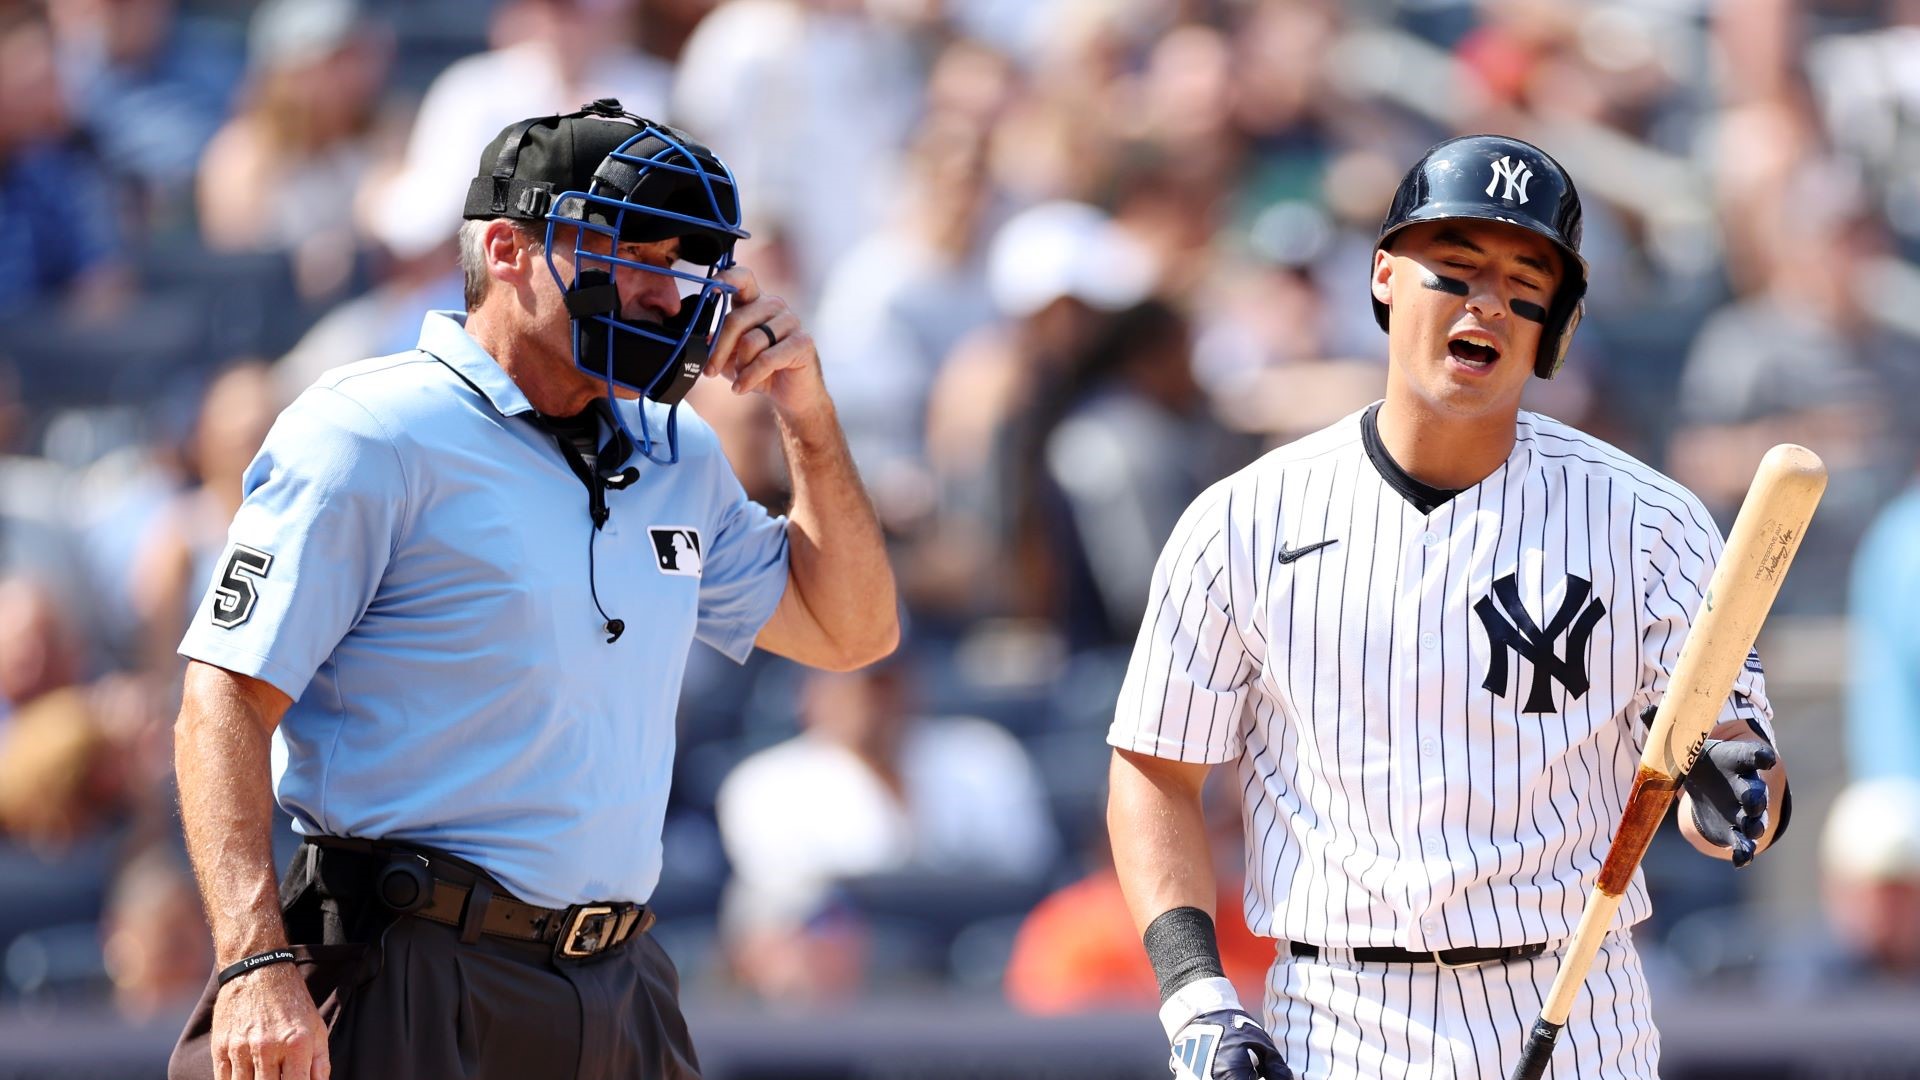 Anthony Volpe #11 of the New York Yankees reacts after a call made by home plate umpire umpire Angel Hernandez #5 during the fifth inning against the Houston Astros at Yankee Stadium.